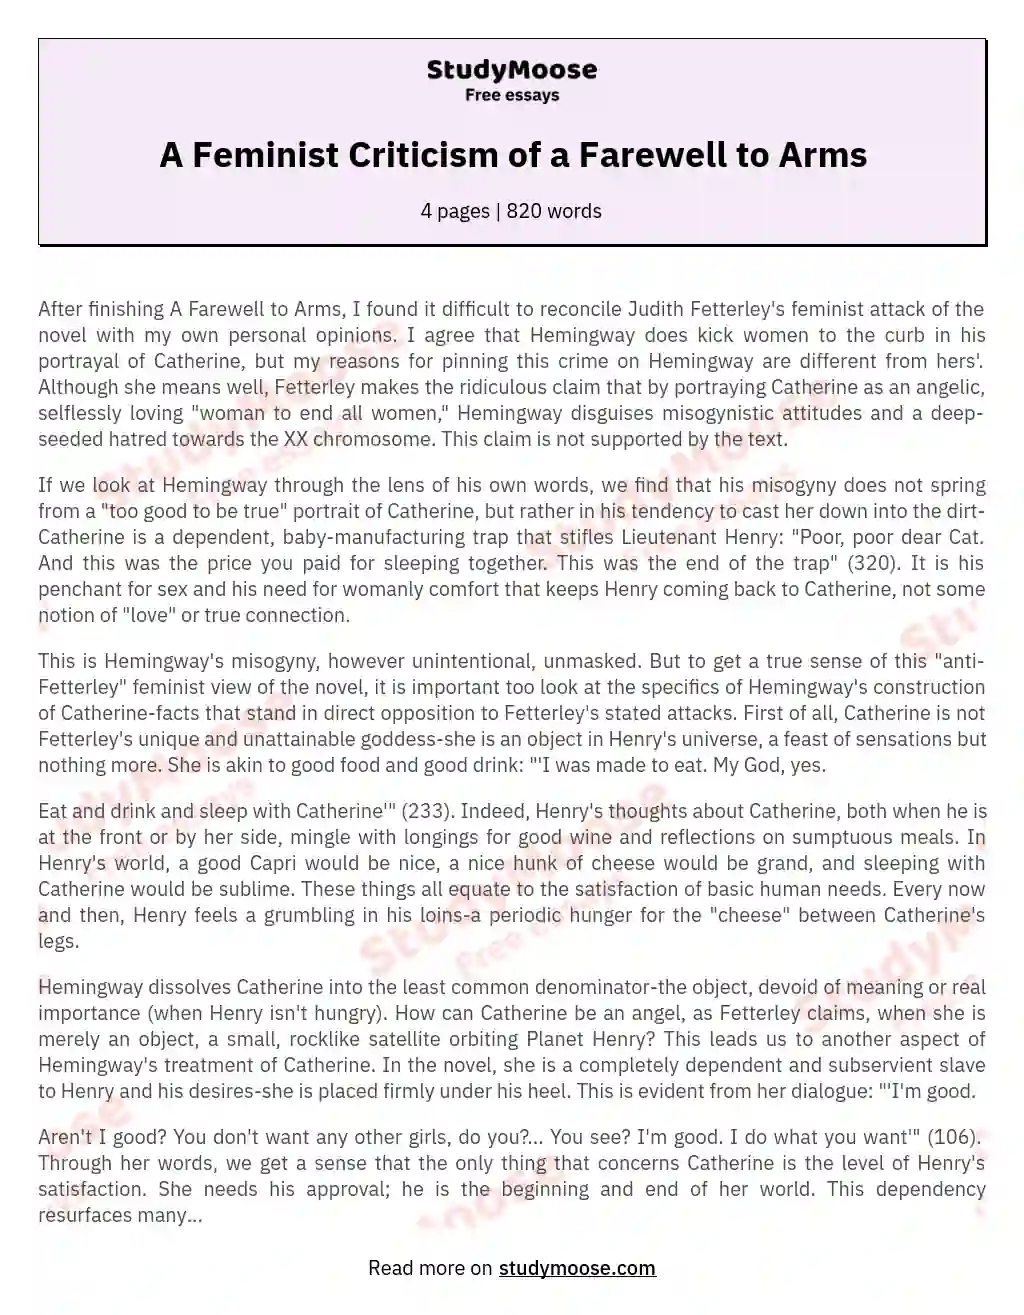 A Feminist Criticism of a Farewell to Arms